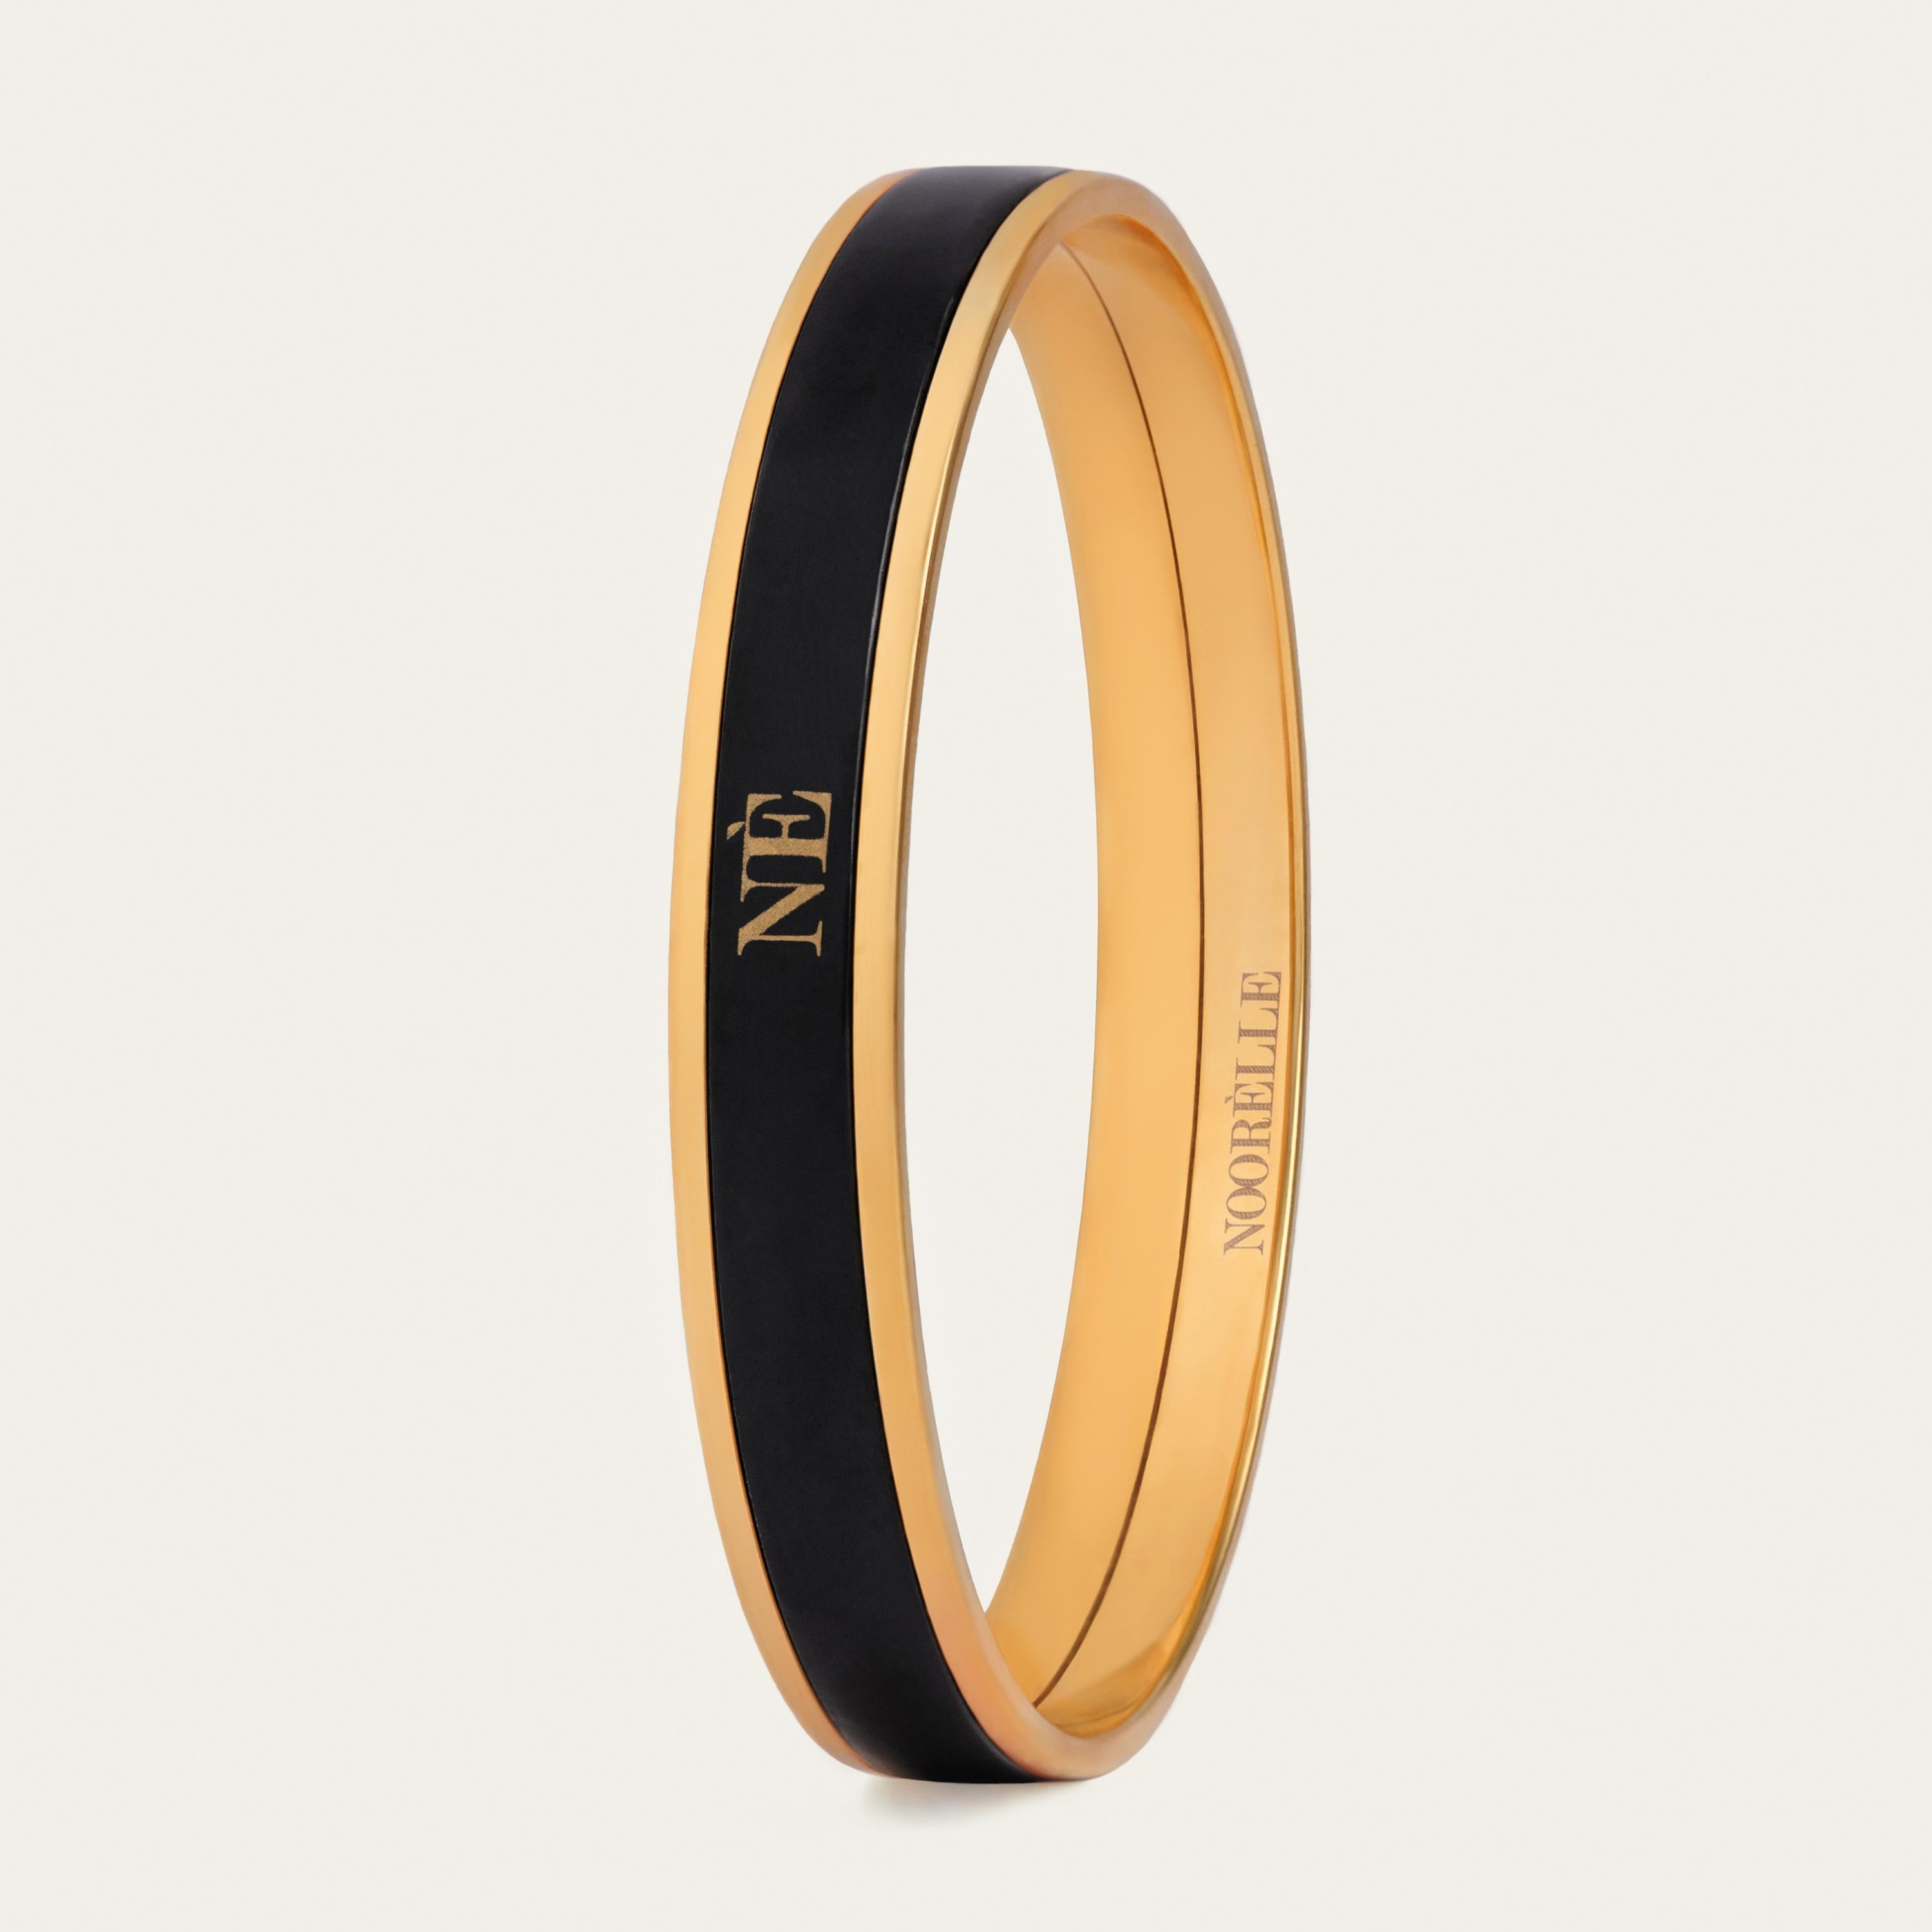 Presenting the Monochrome Bangle in Black! Elevate your style with our exquisite 18k gold-plated stainless steel bangle. Hand-painted with genuine fire enamel in vivid colors that will last forever, this luxurious piece is designed to make a